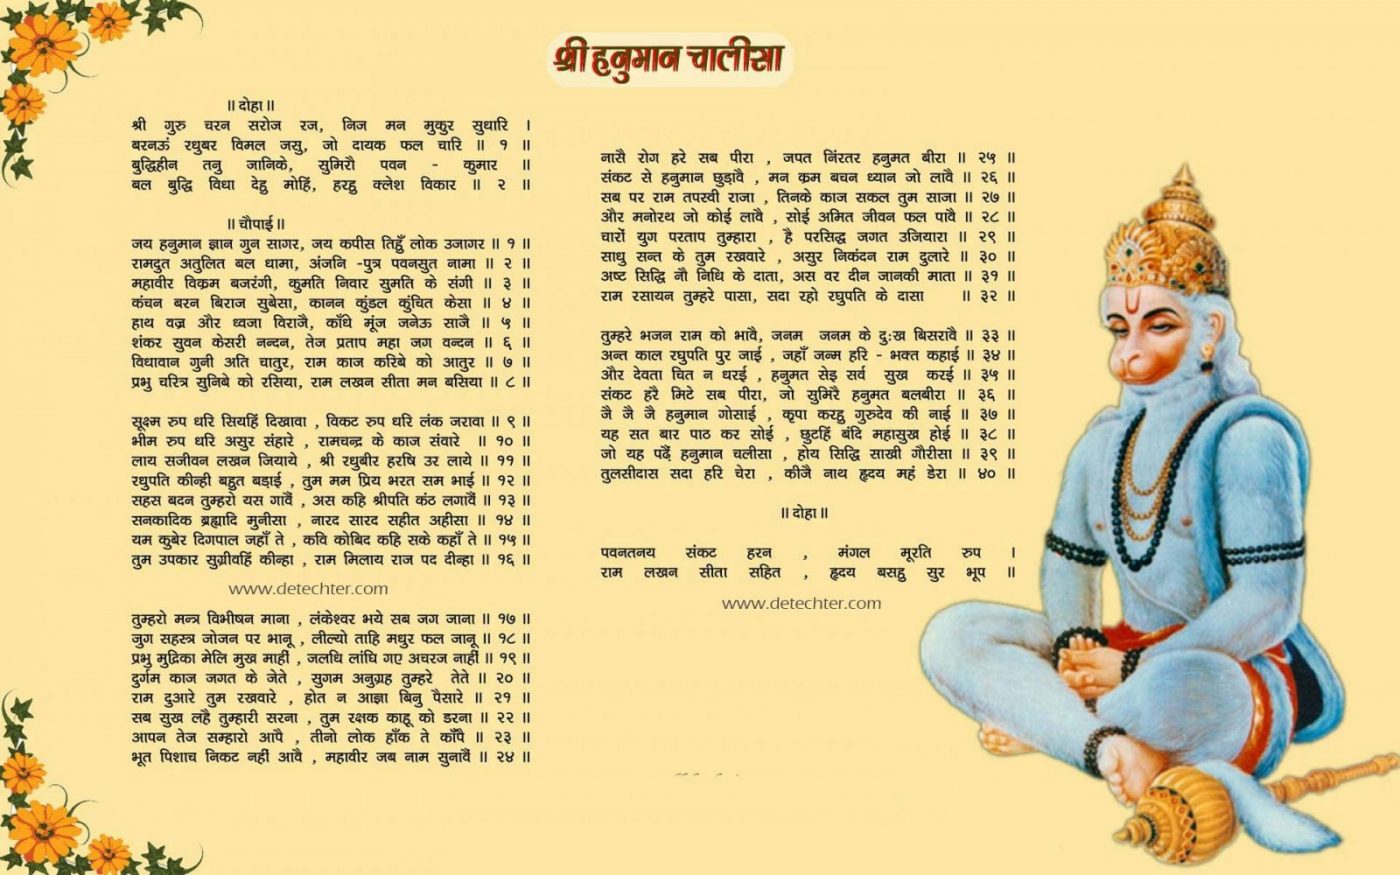 12 Lessons from Hanuman Chalisa that everyone should learn